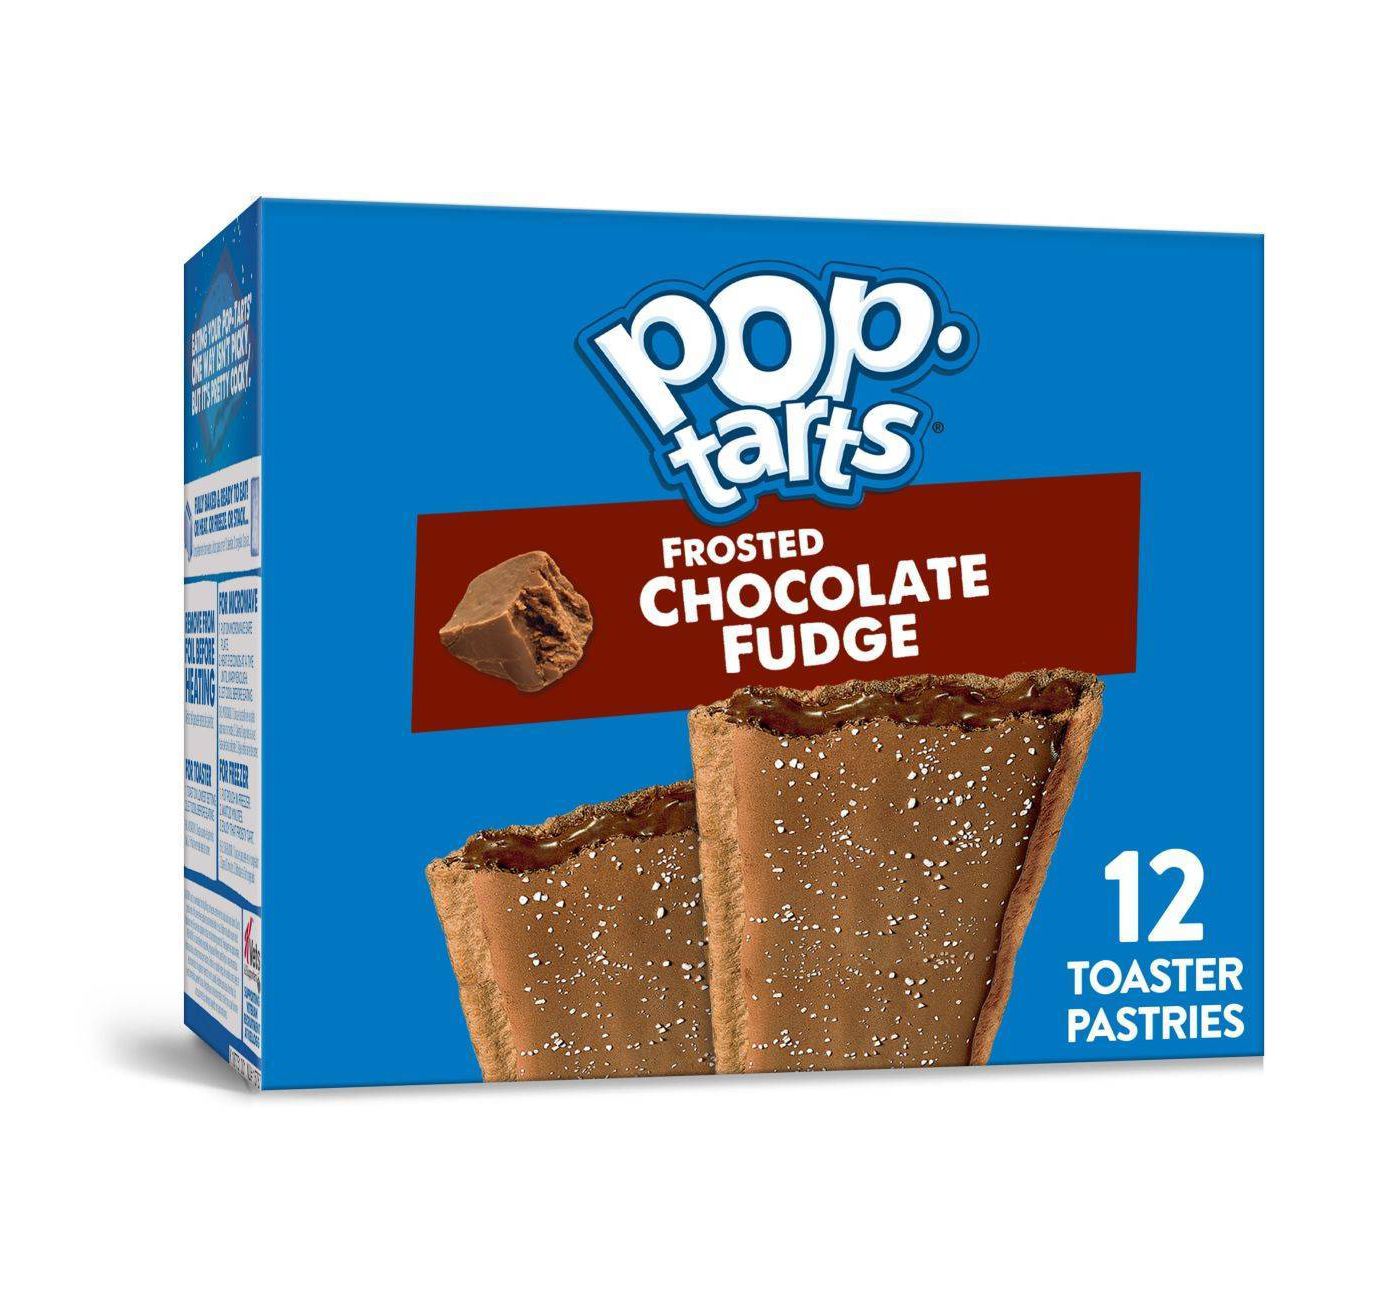 Frosted Chocolate Fudge Toaster Pastries